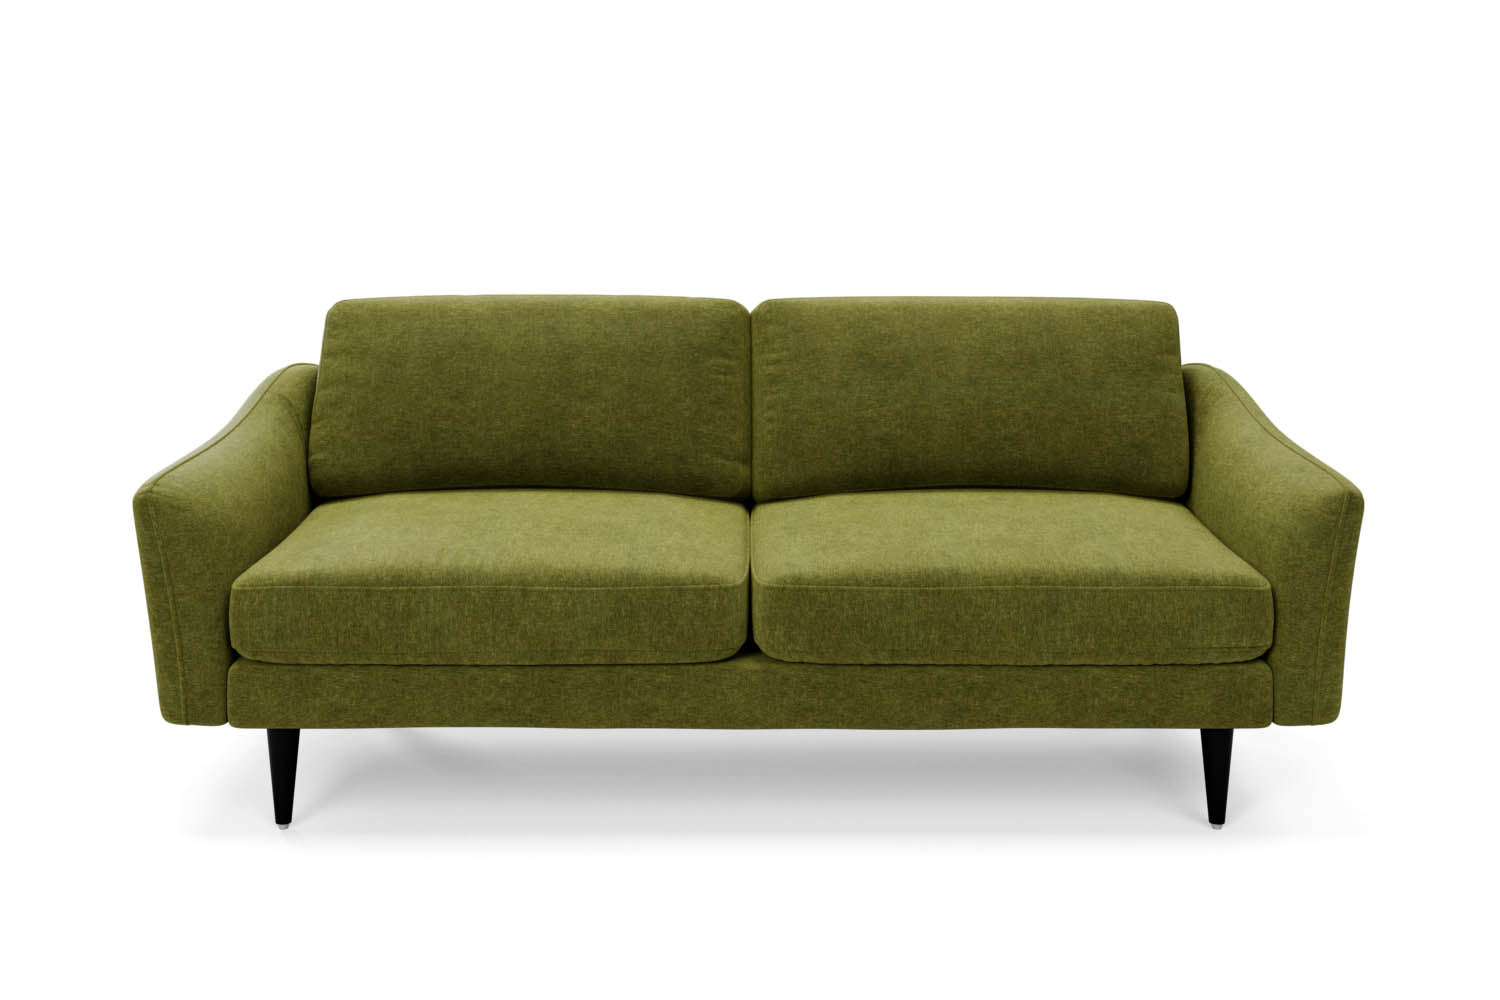 The Rebel 3 Seater Sofa in Moss with black legs front variant_40886299656240